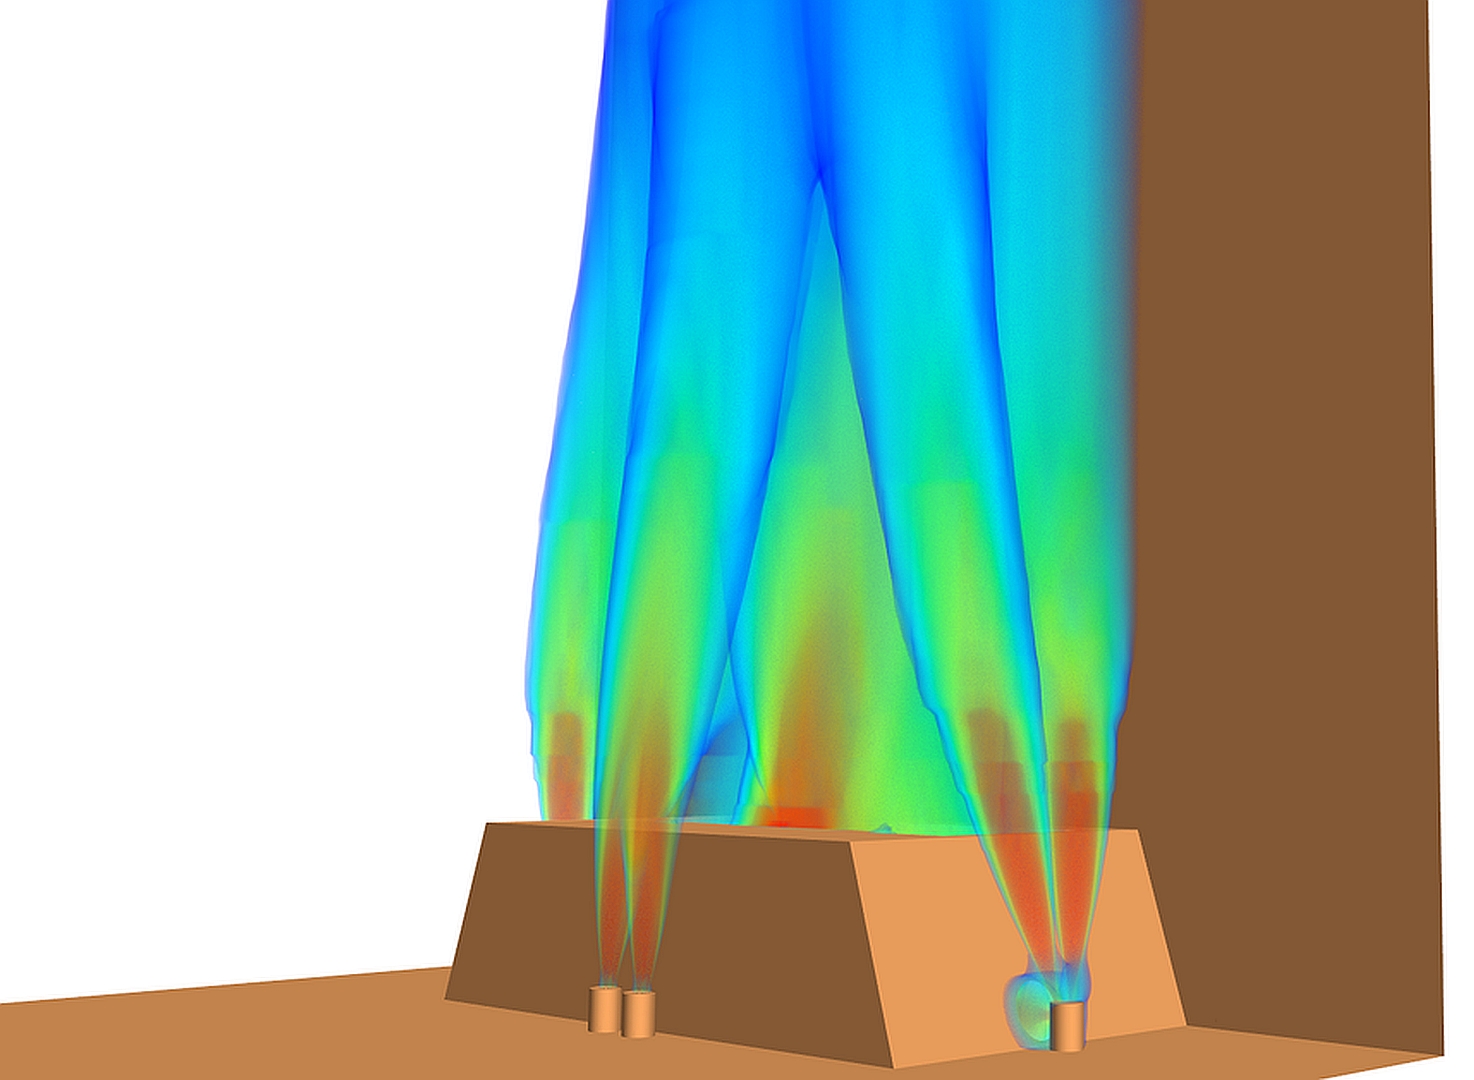 high temperature processes such as combustion are simulated with Simcenter STAR-CCM+